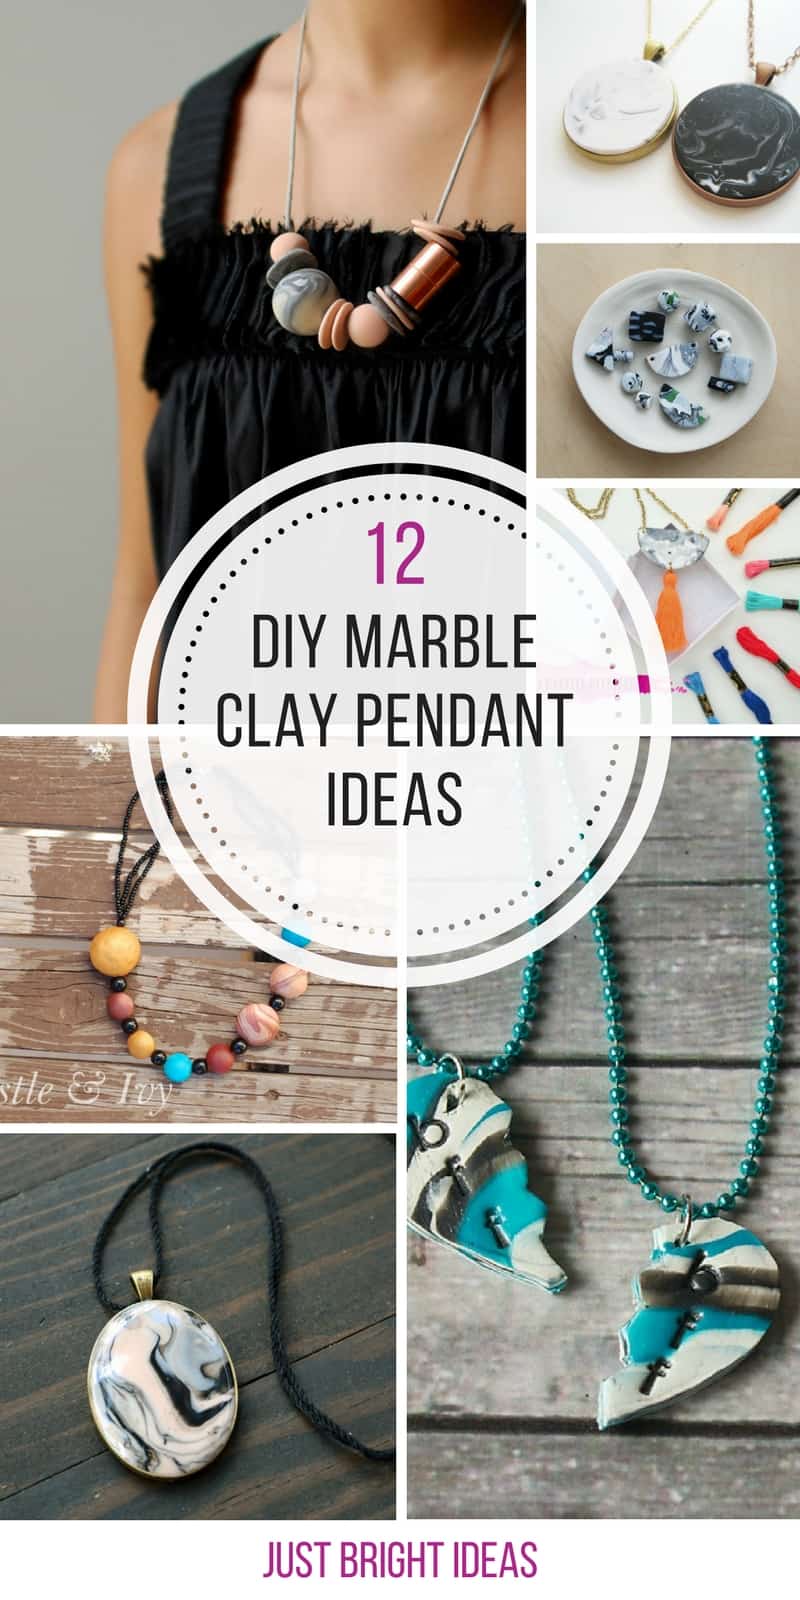 Can't wait to try out some of these marbled clay necklace ideas! Thanks for sharing!